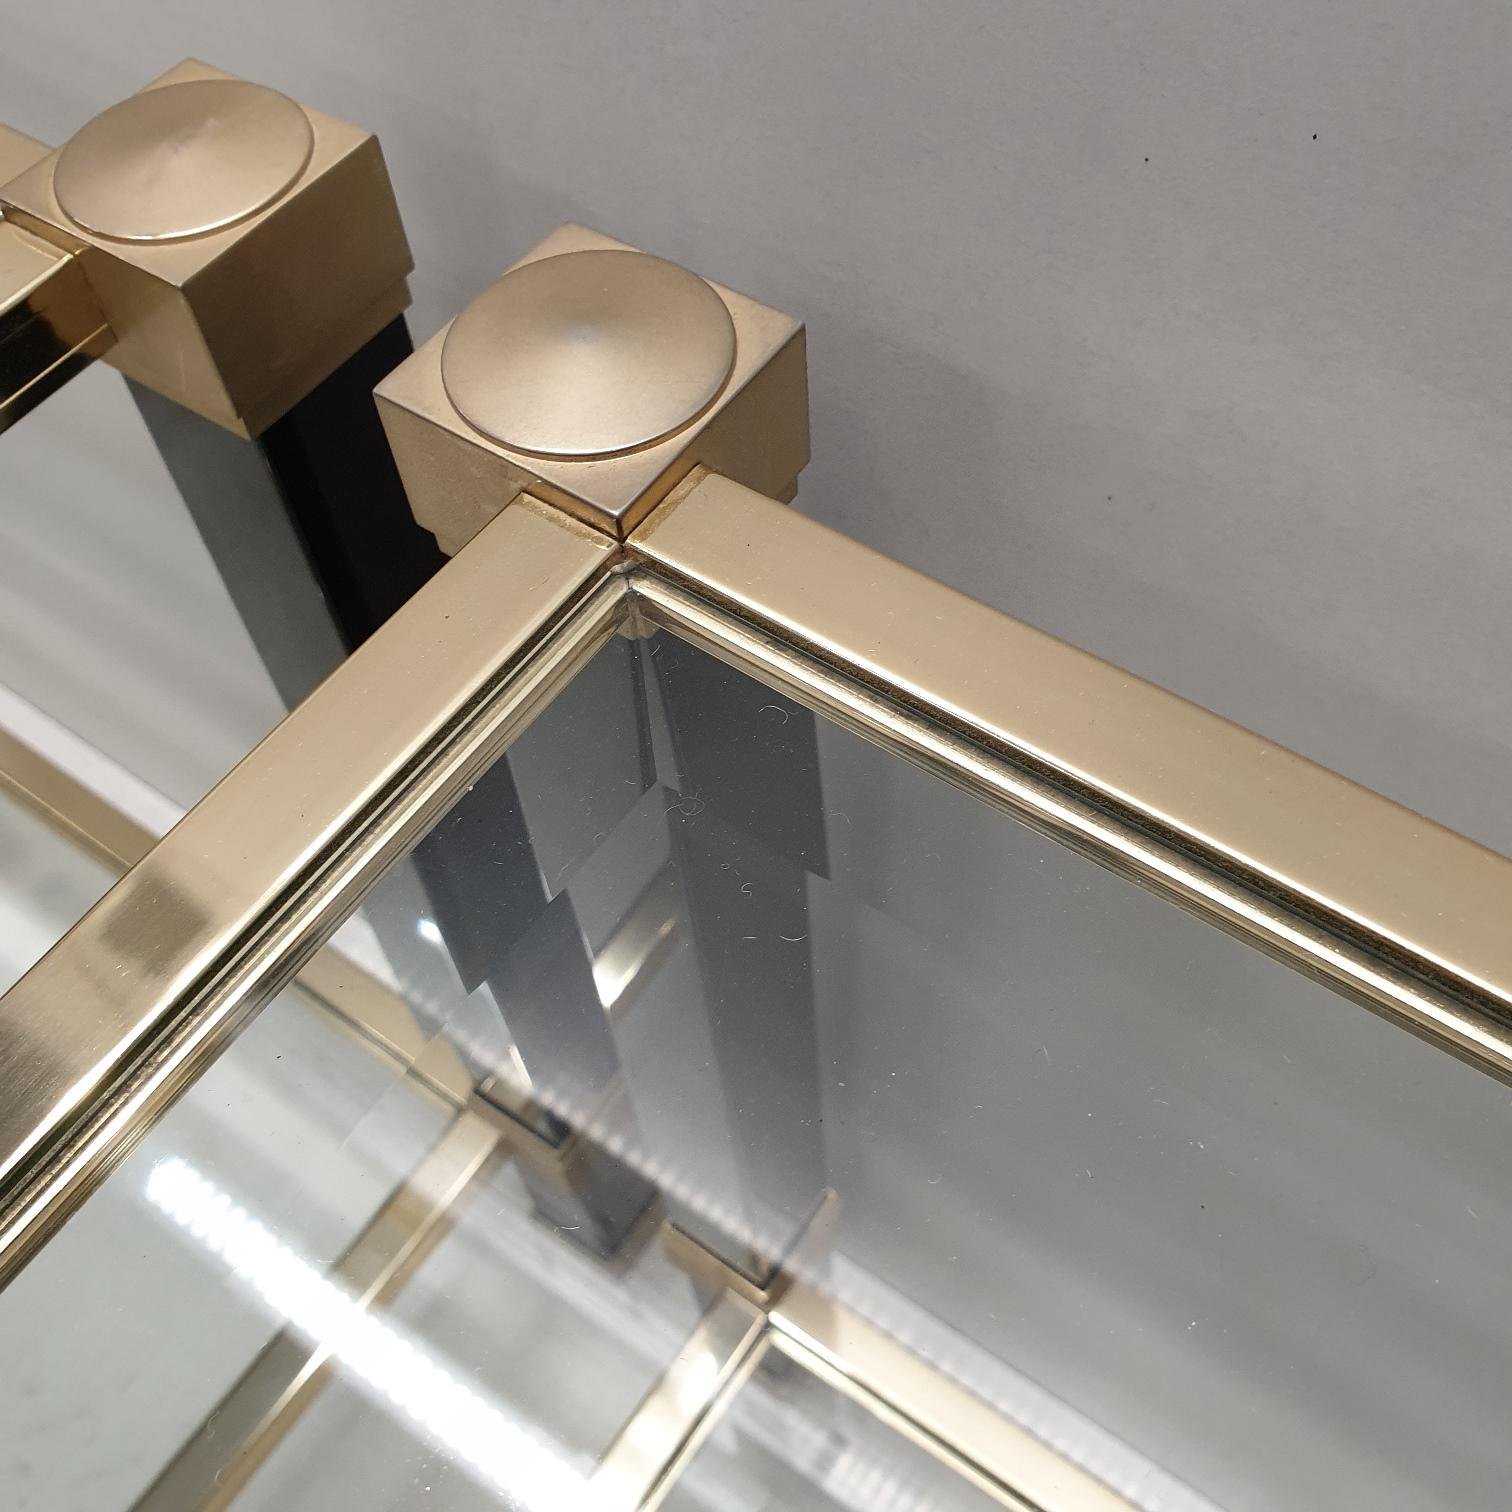 Pair of Brass 2-Tiers Square Site Tables by Pierre Vandel, 1980s, 1 Set of 2 For Sale 3